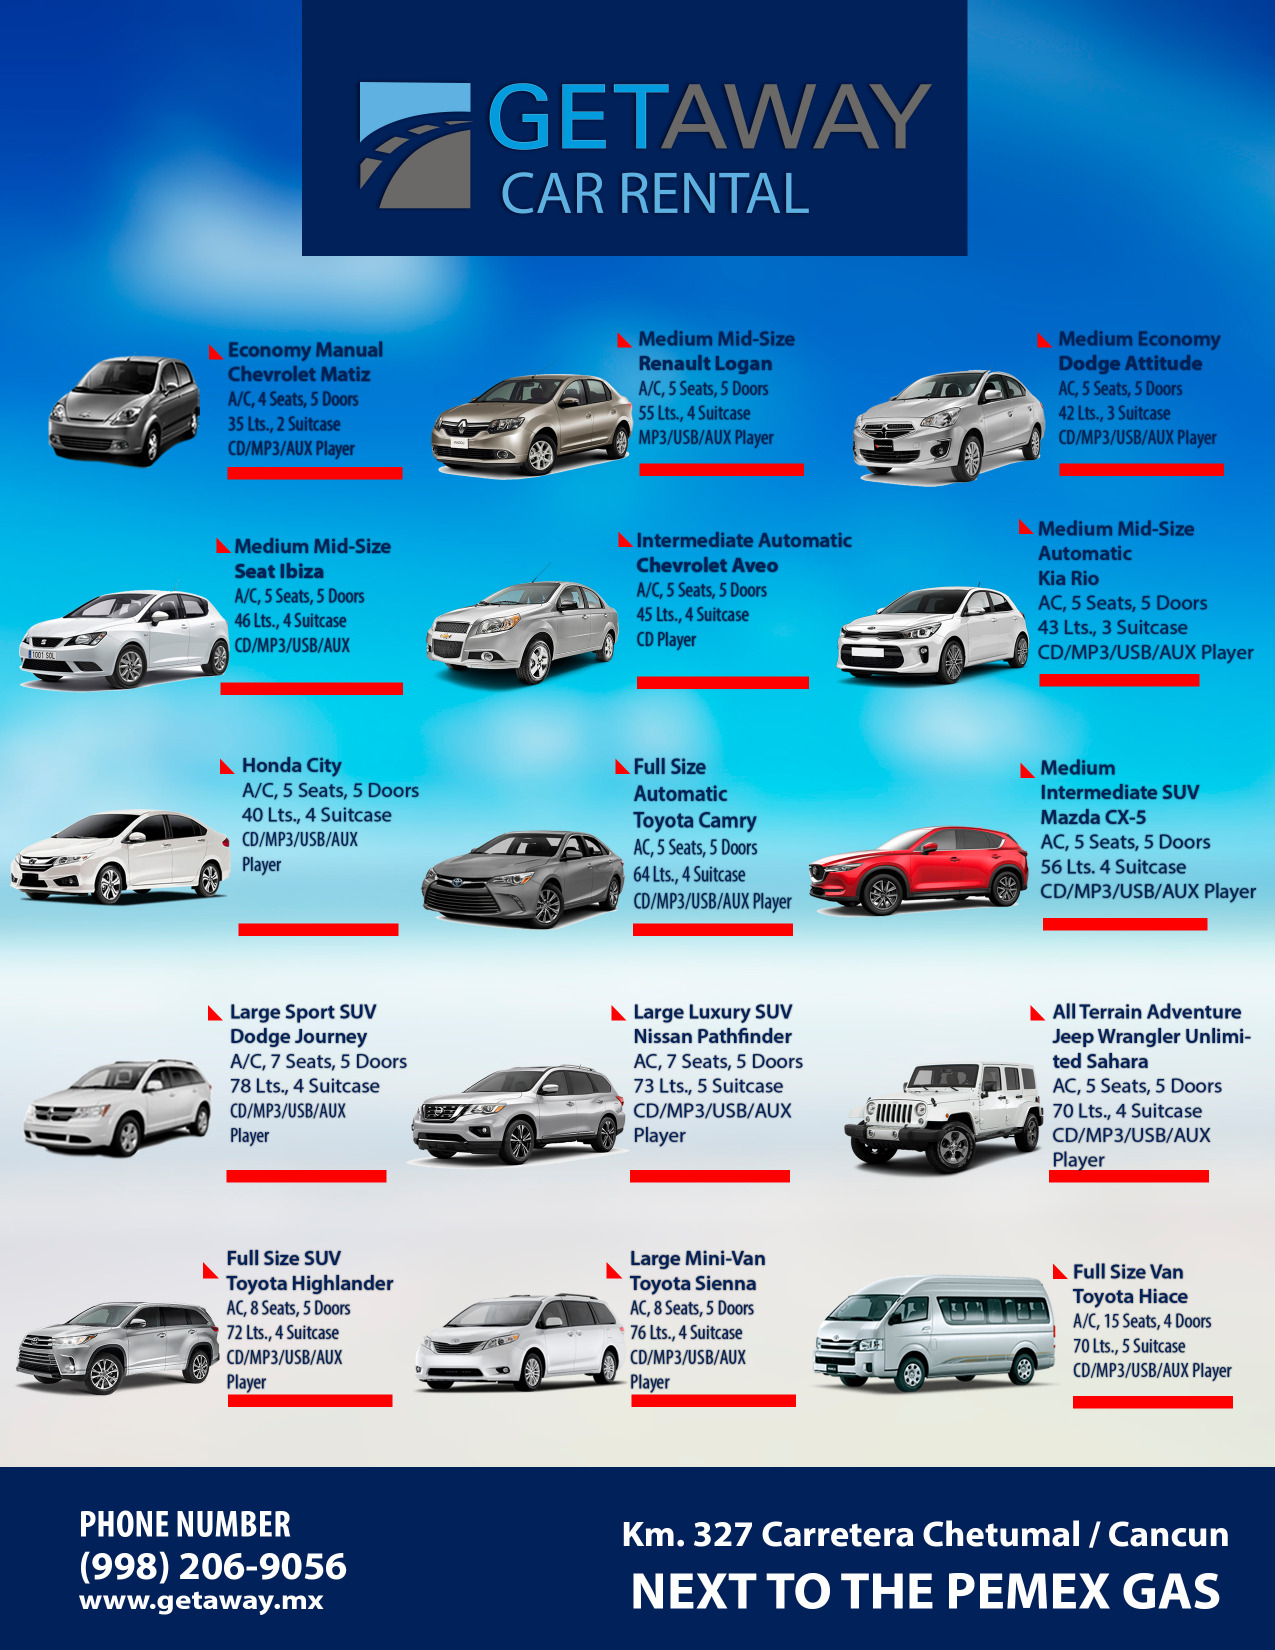 list of cars avaible from Getaway car rental for the secret becah villas guest